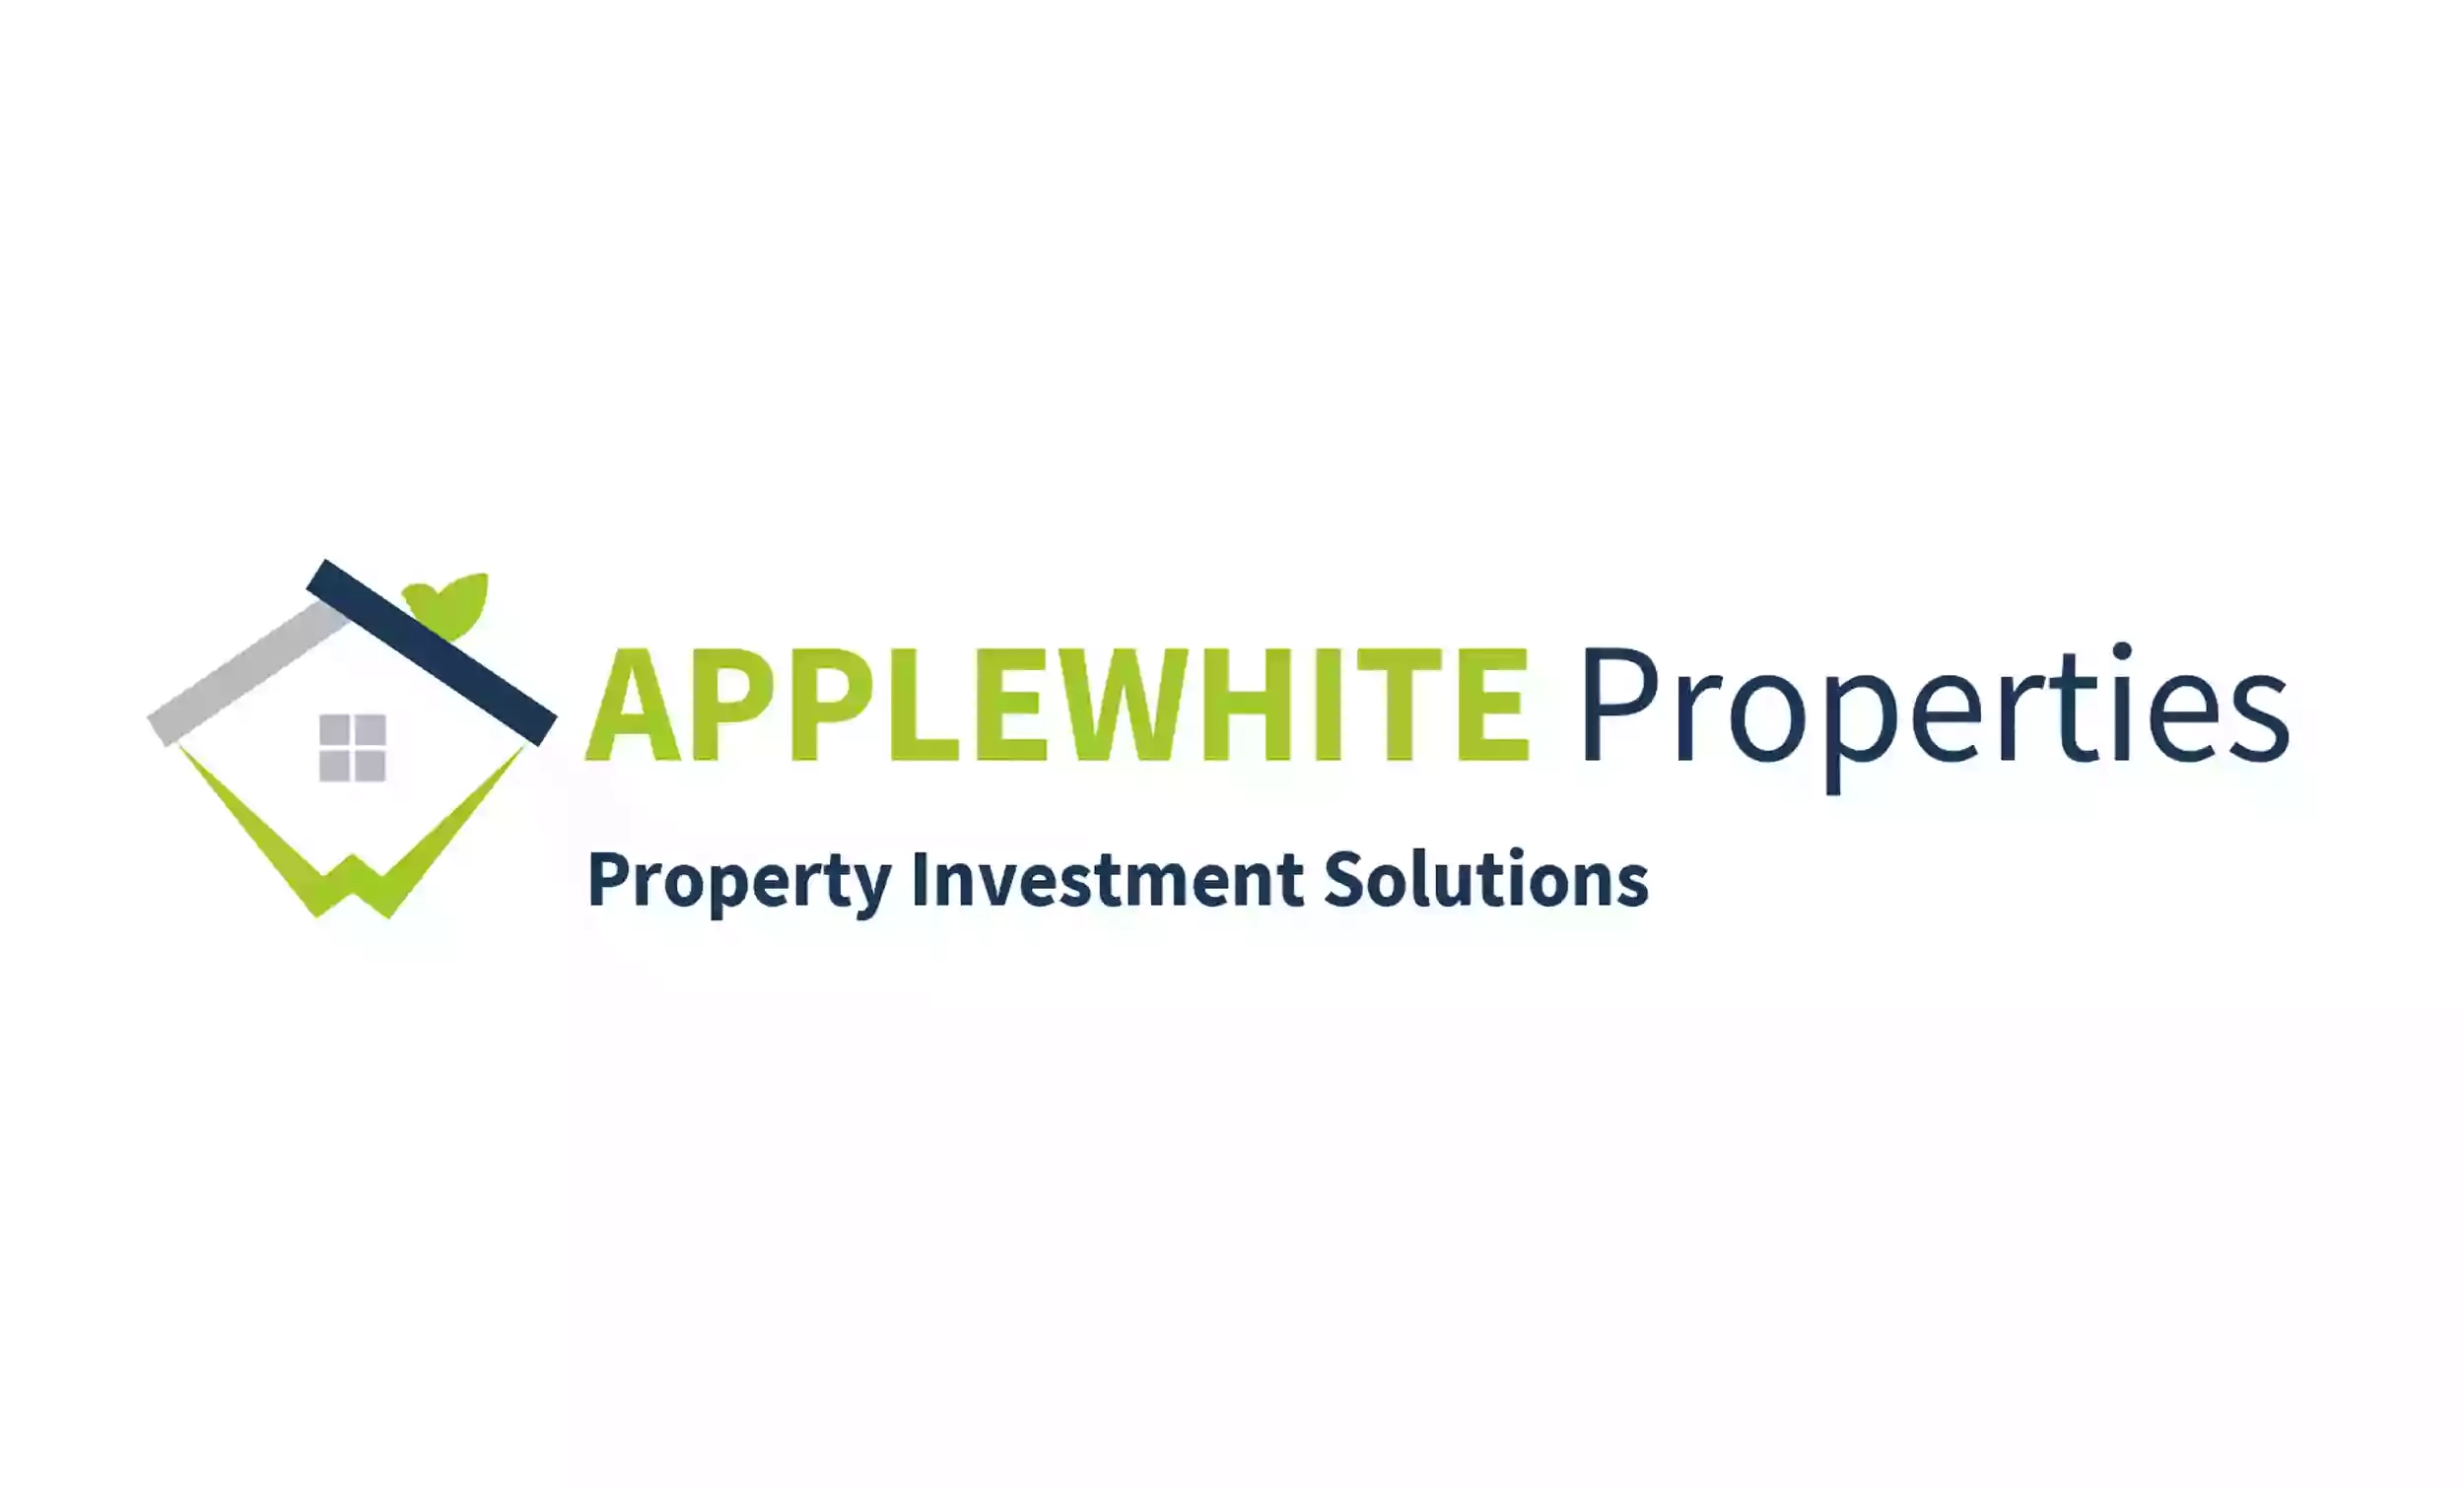 Applewhite Properties Ltd: Property Investment Solutions